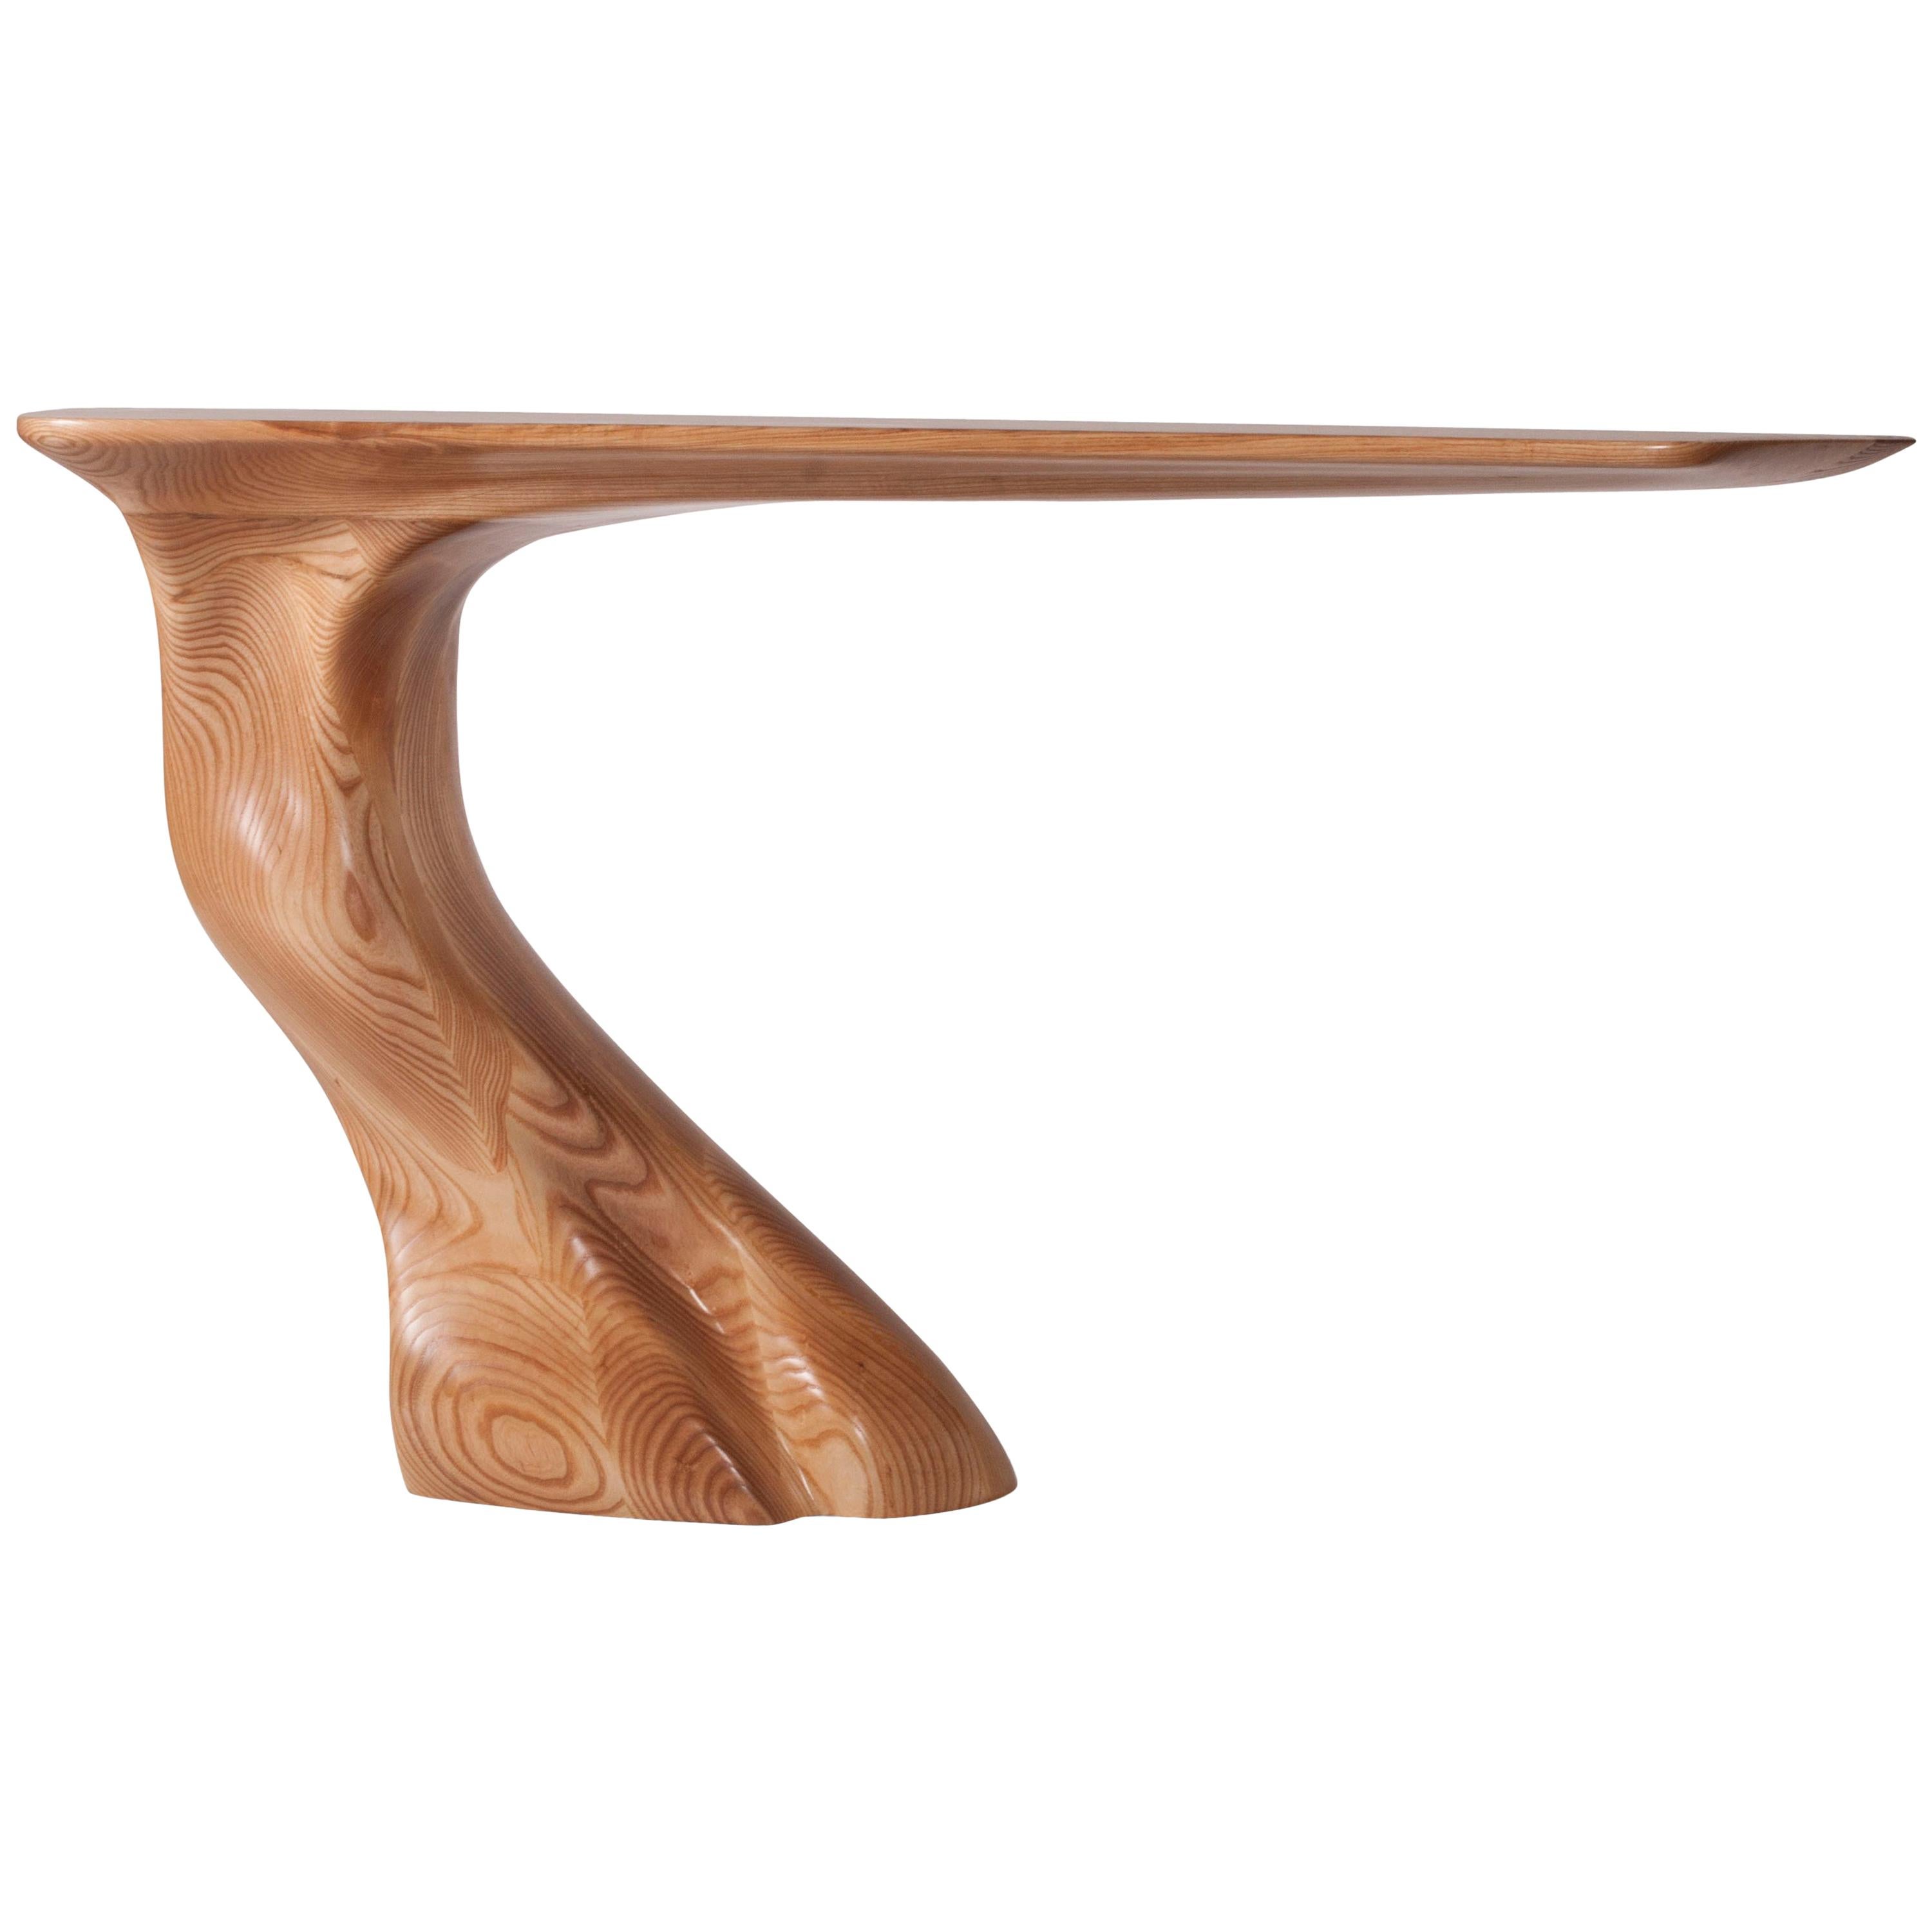 Amorph Frolic Console Facing Right Solid Wood, Honey Stained For Sale